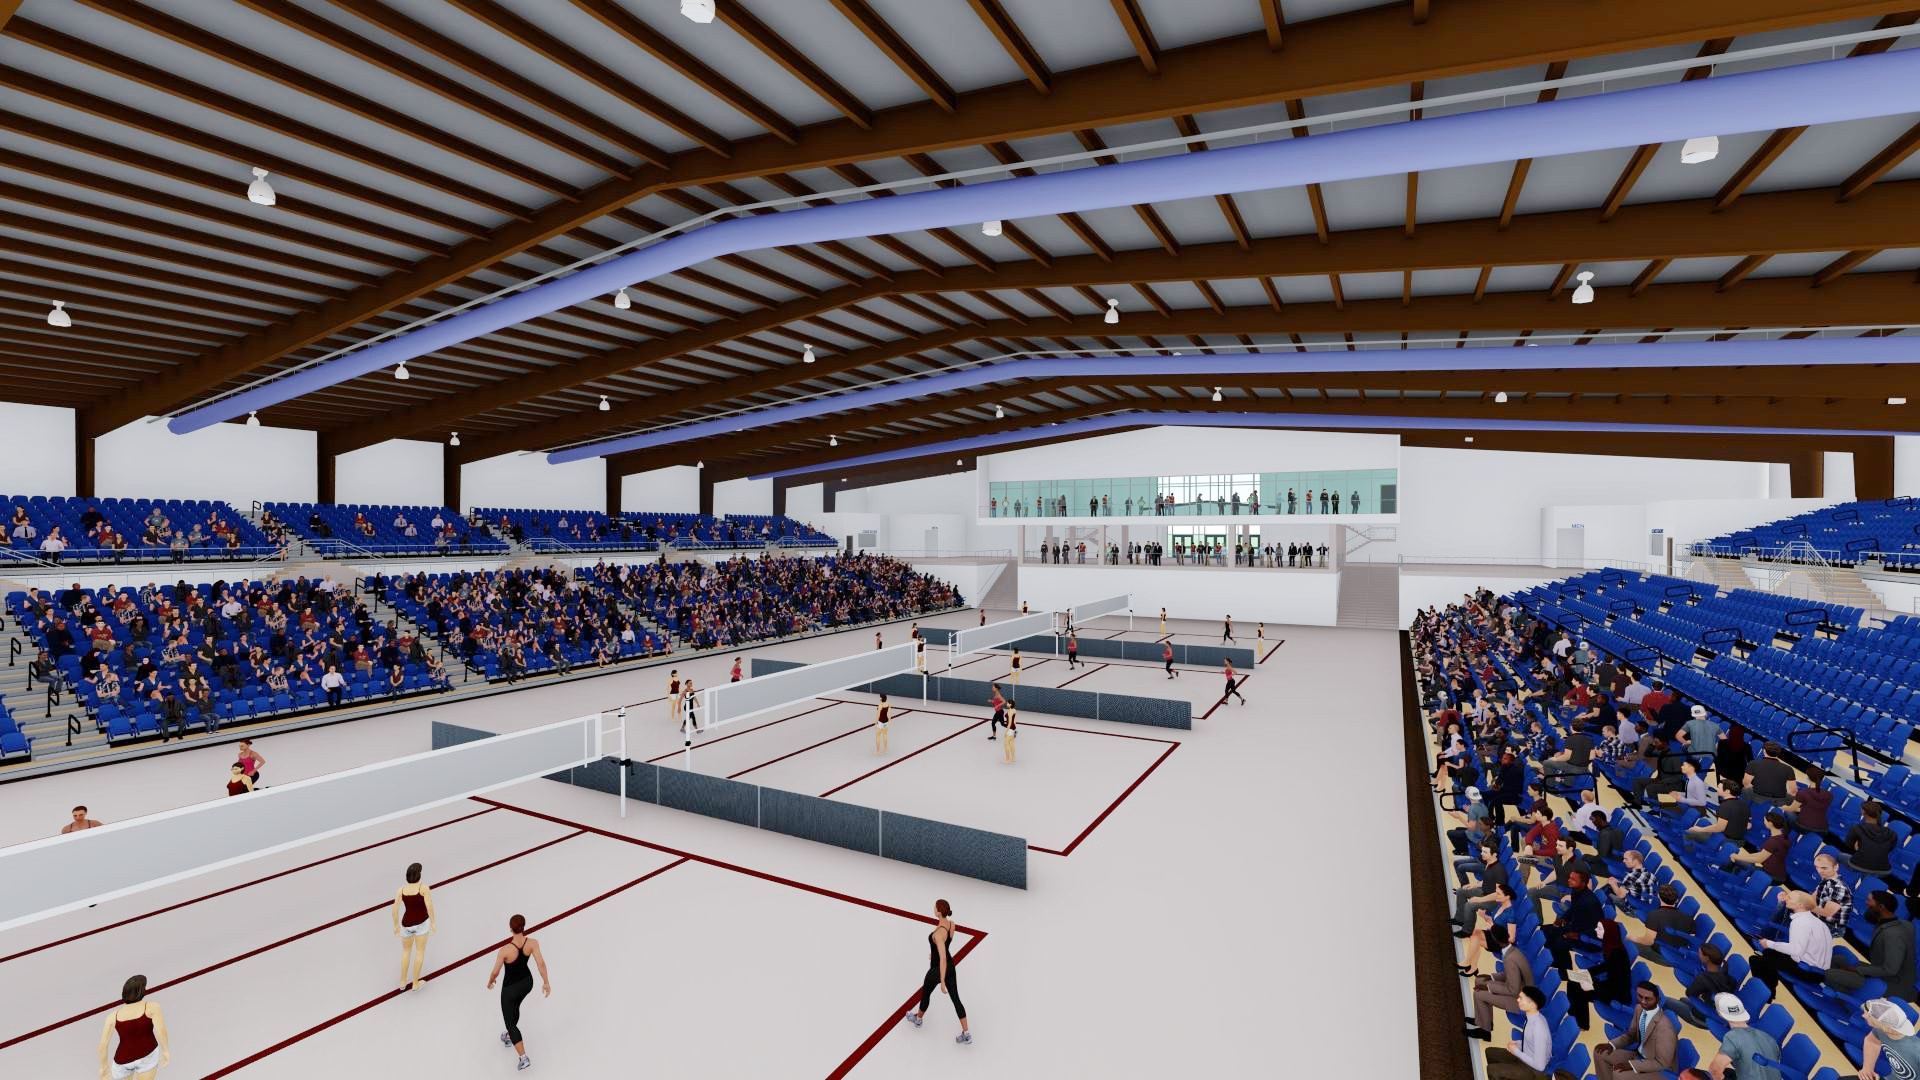 Artist's rendering of the inside of the new arena at the Ozark Empire Fairgrounds